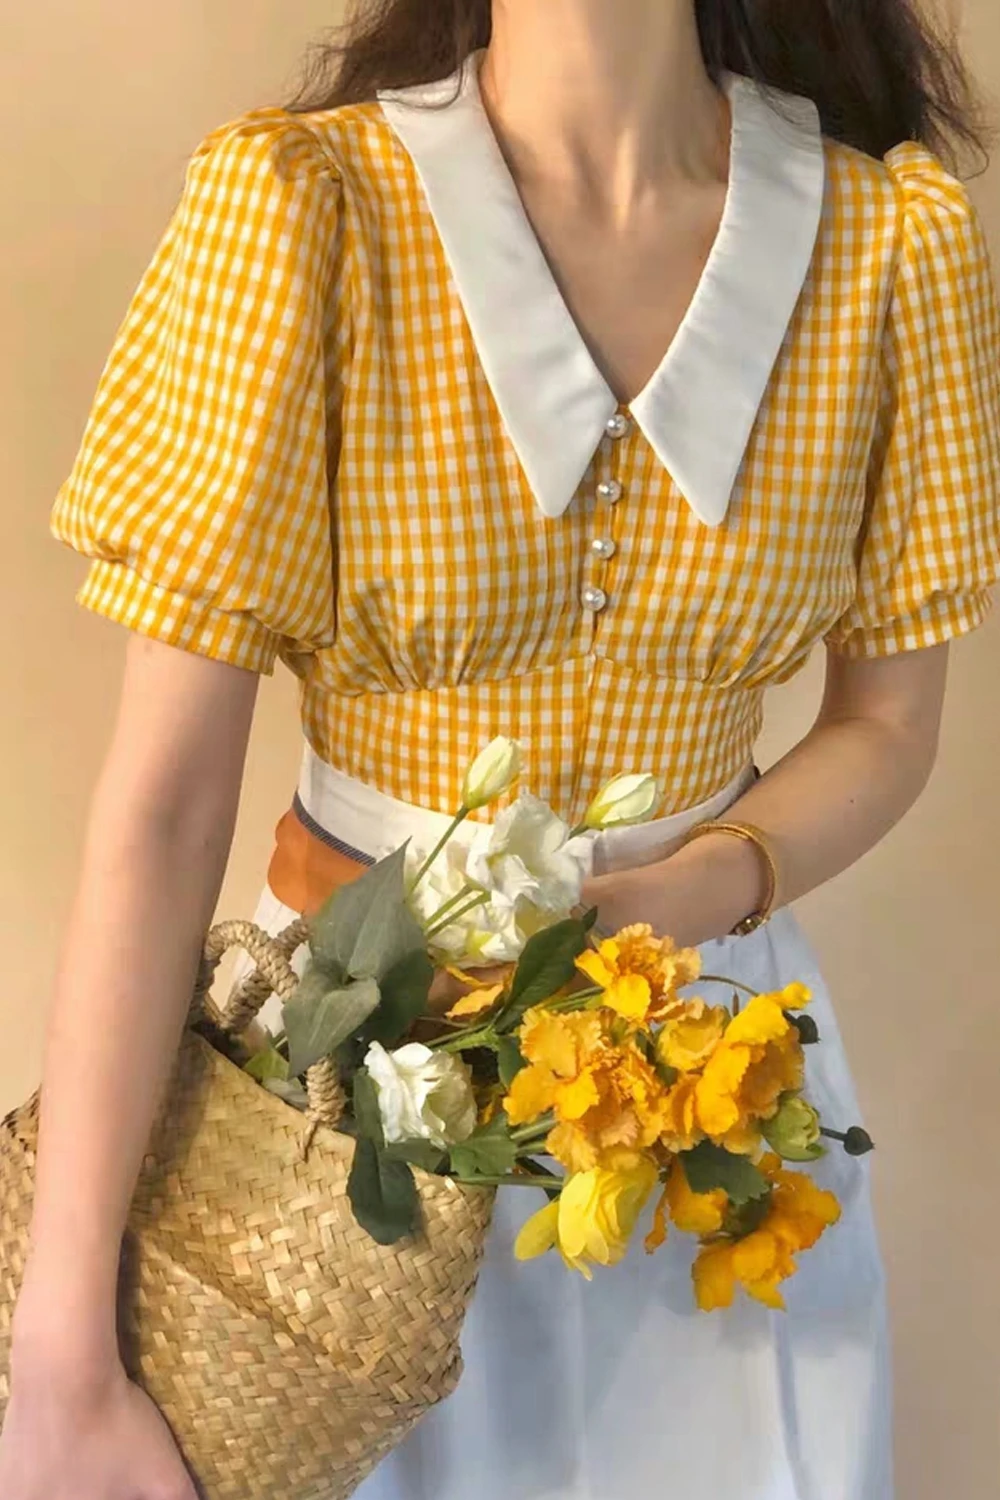 How to Wear Yellow Shirt: 15 Cheerful Outfit Ideas for Women